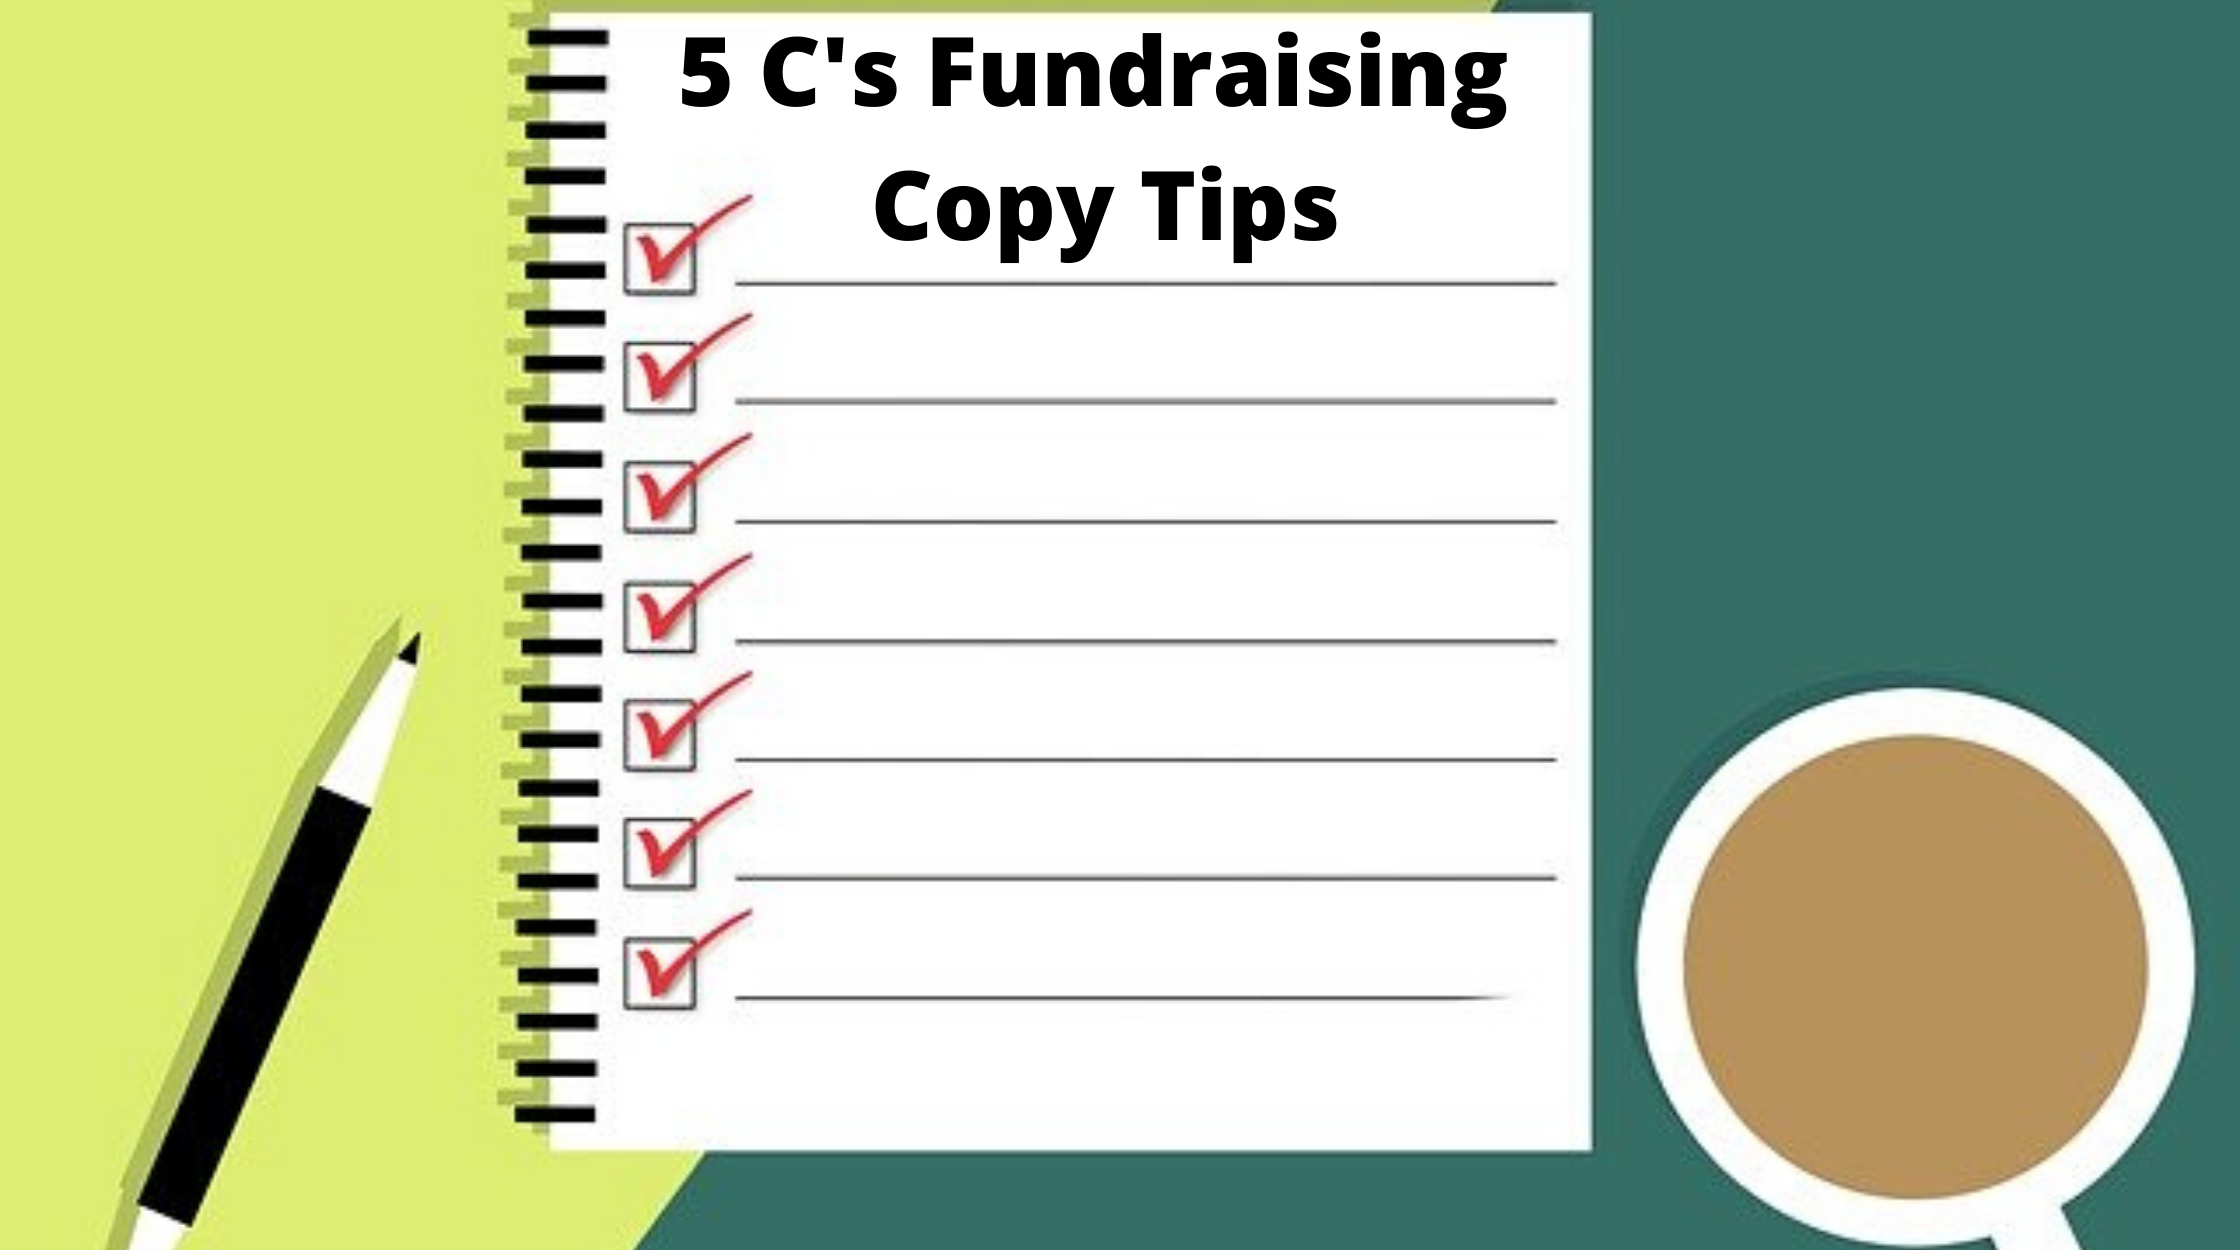 5 C's Tips to Great Fundraising Copy